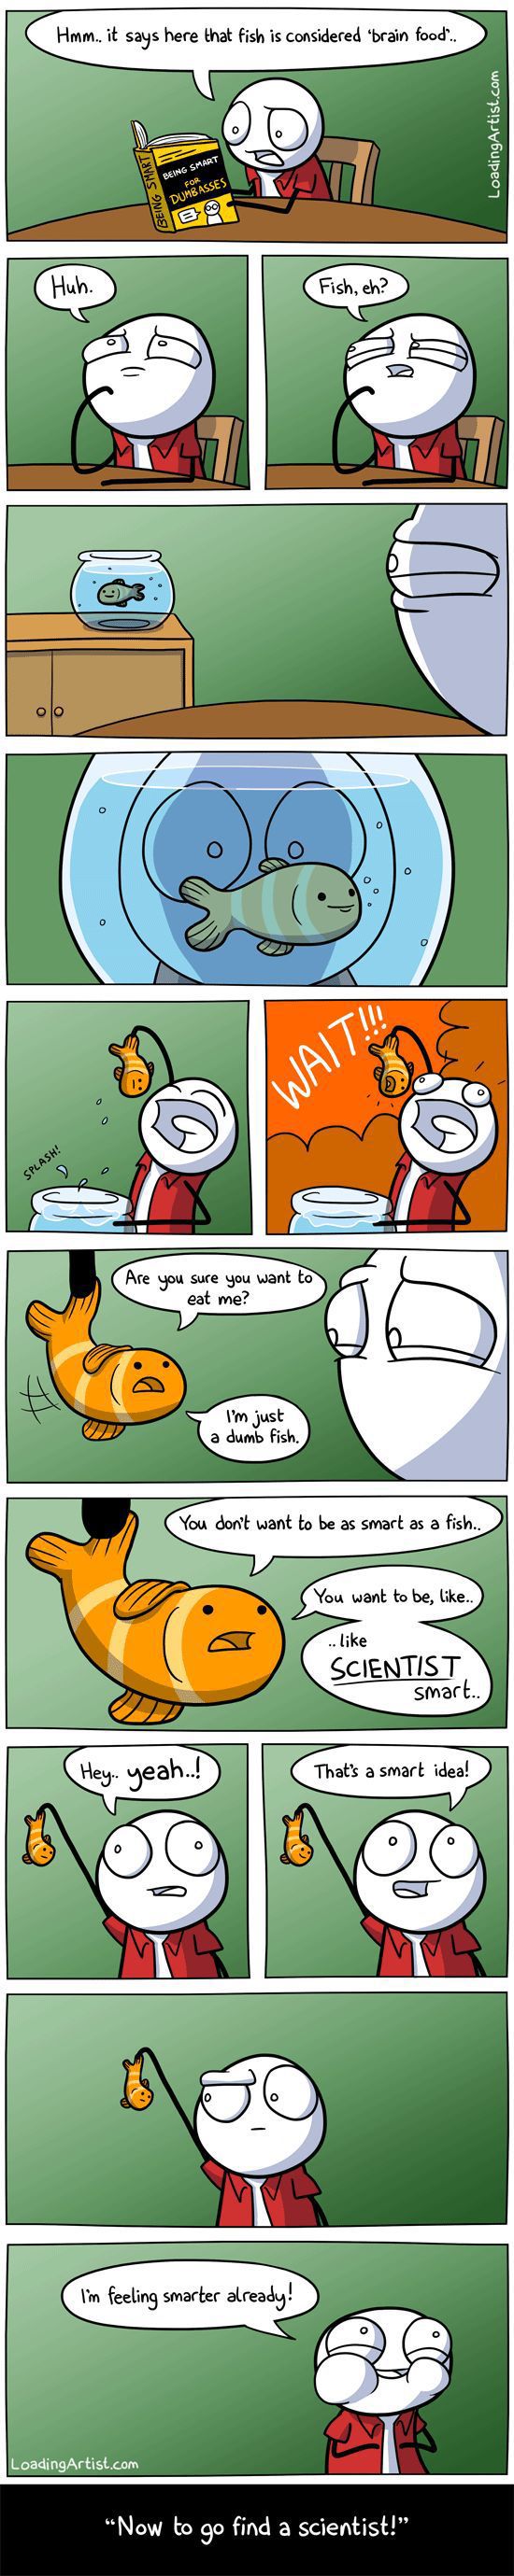 Great Collection of Funny Refreshing Comics